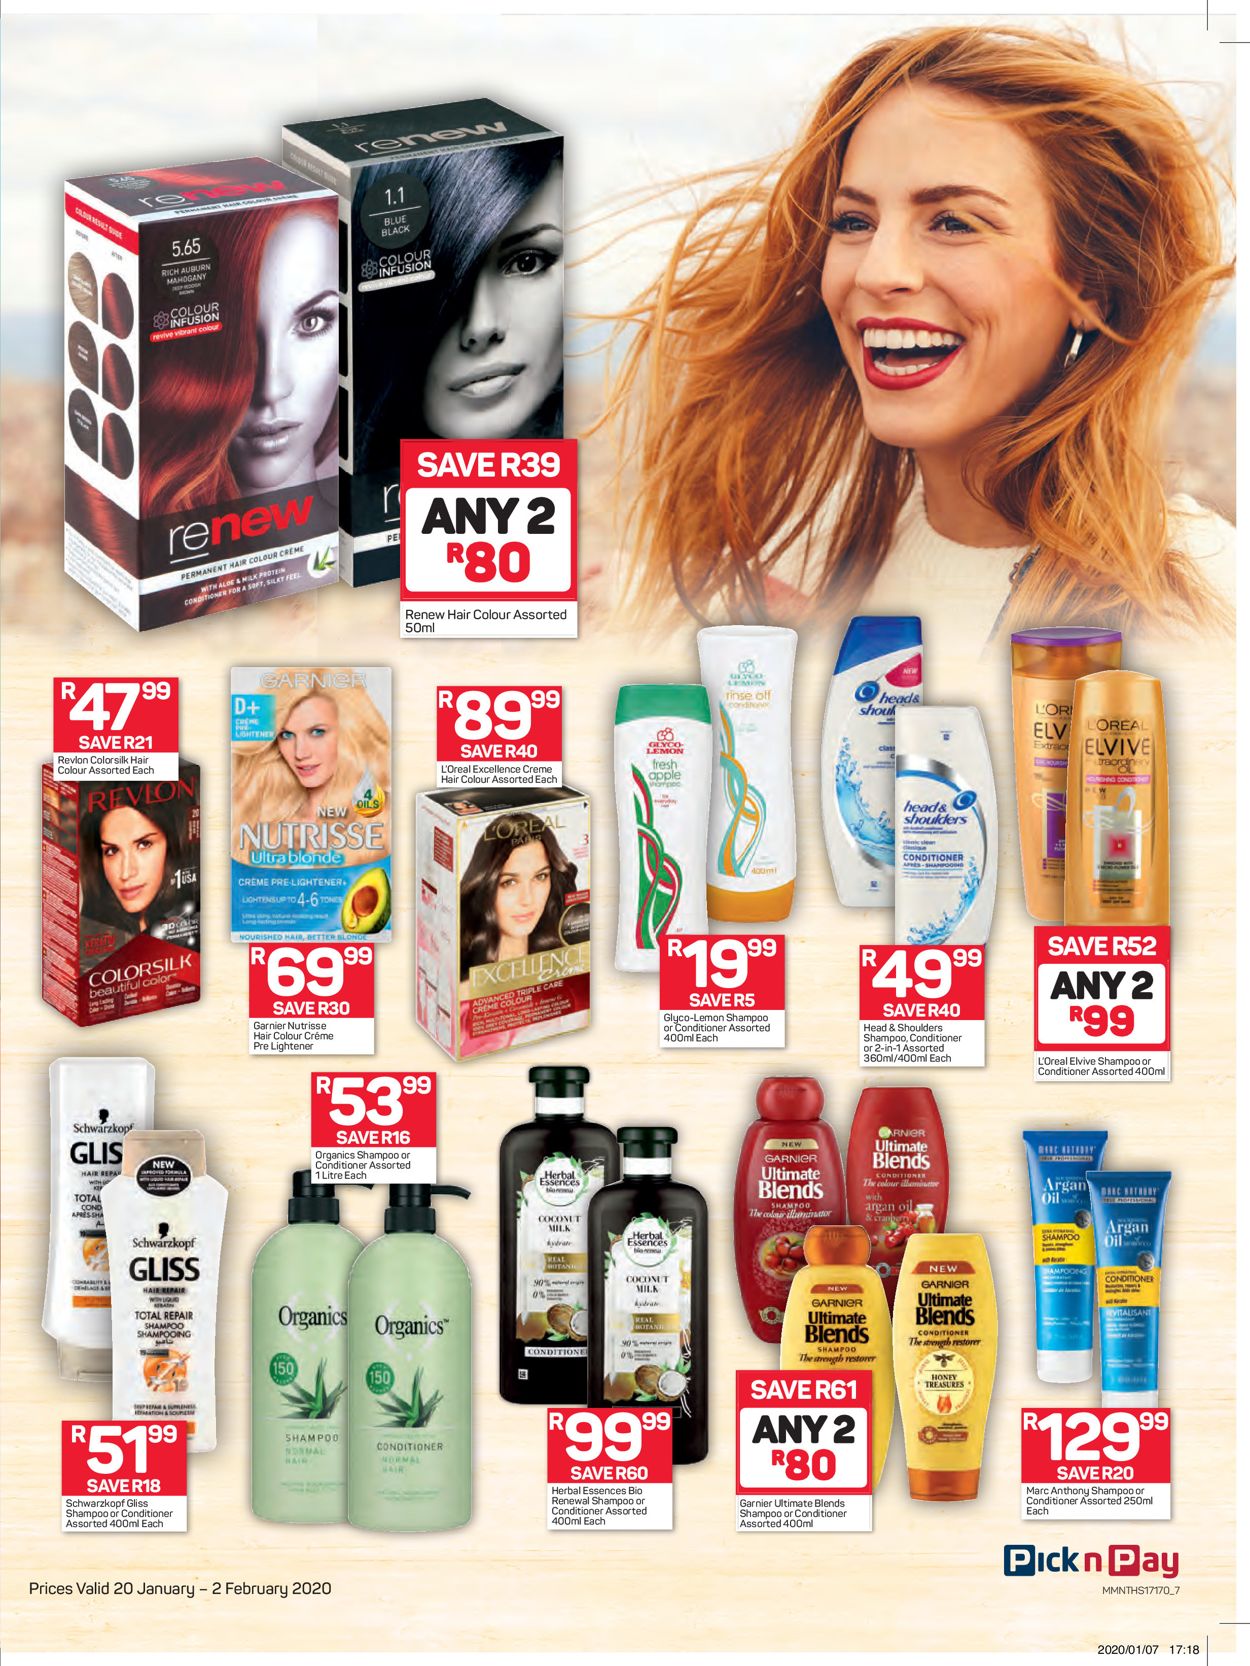 Pick n Pay Catalogue - 2020/01/20-2020/02/02 (Page 8)